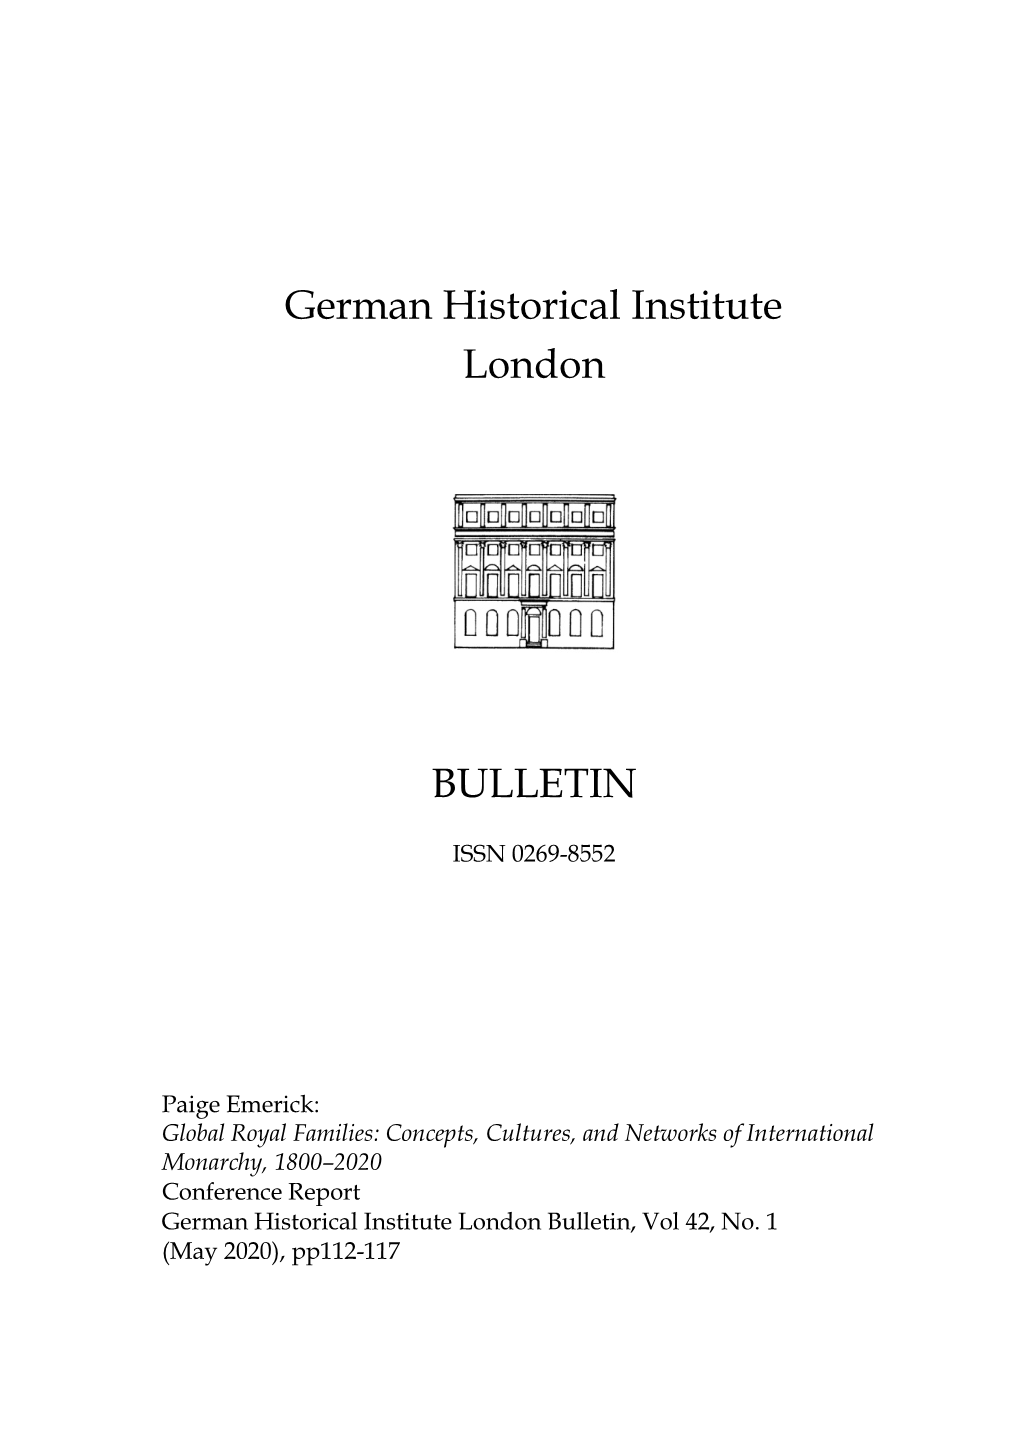 Global Royal Families: Concepts, Cultures, and Networks of International Monarchy, 1800–2020 Conference Report German Historical Institute London Bulletin, Vol 42, No